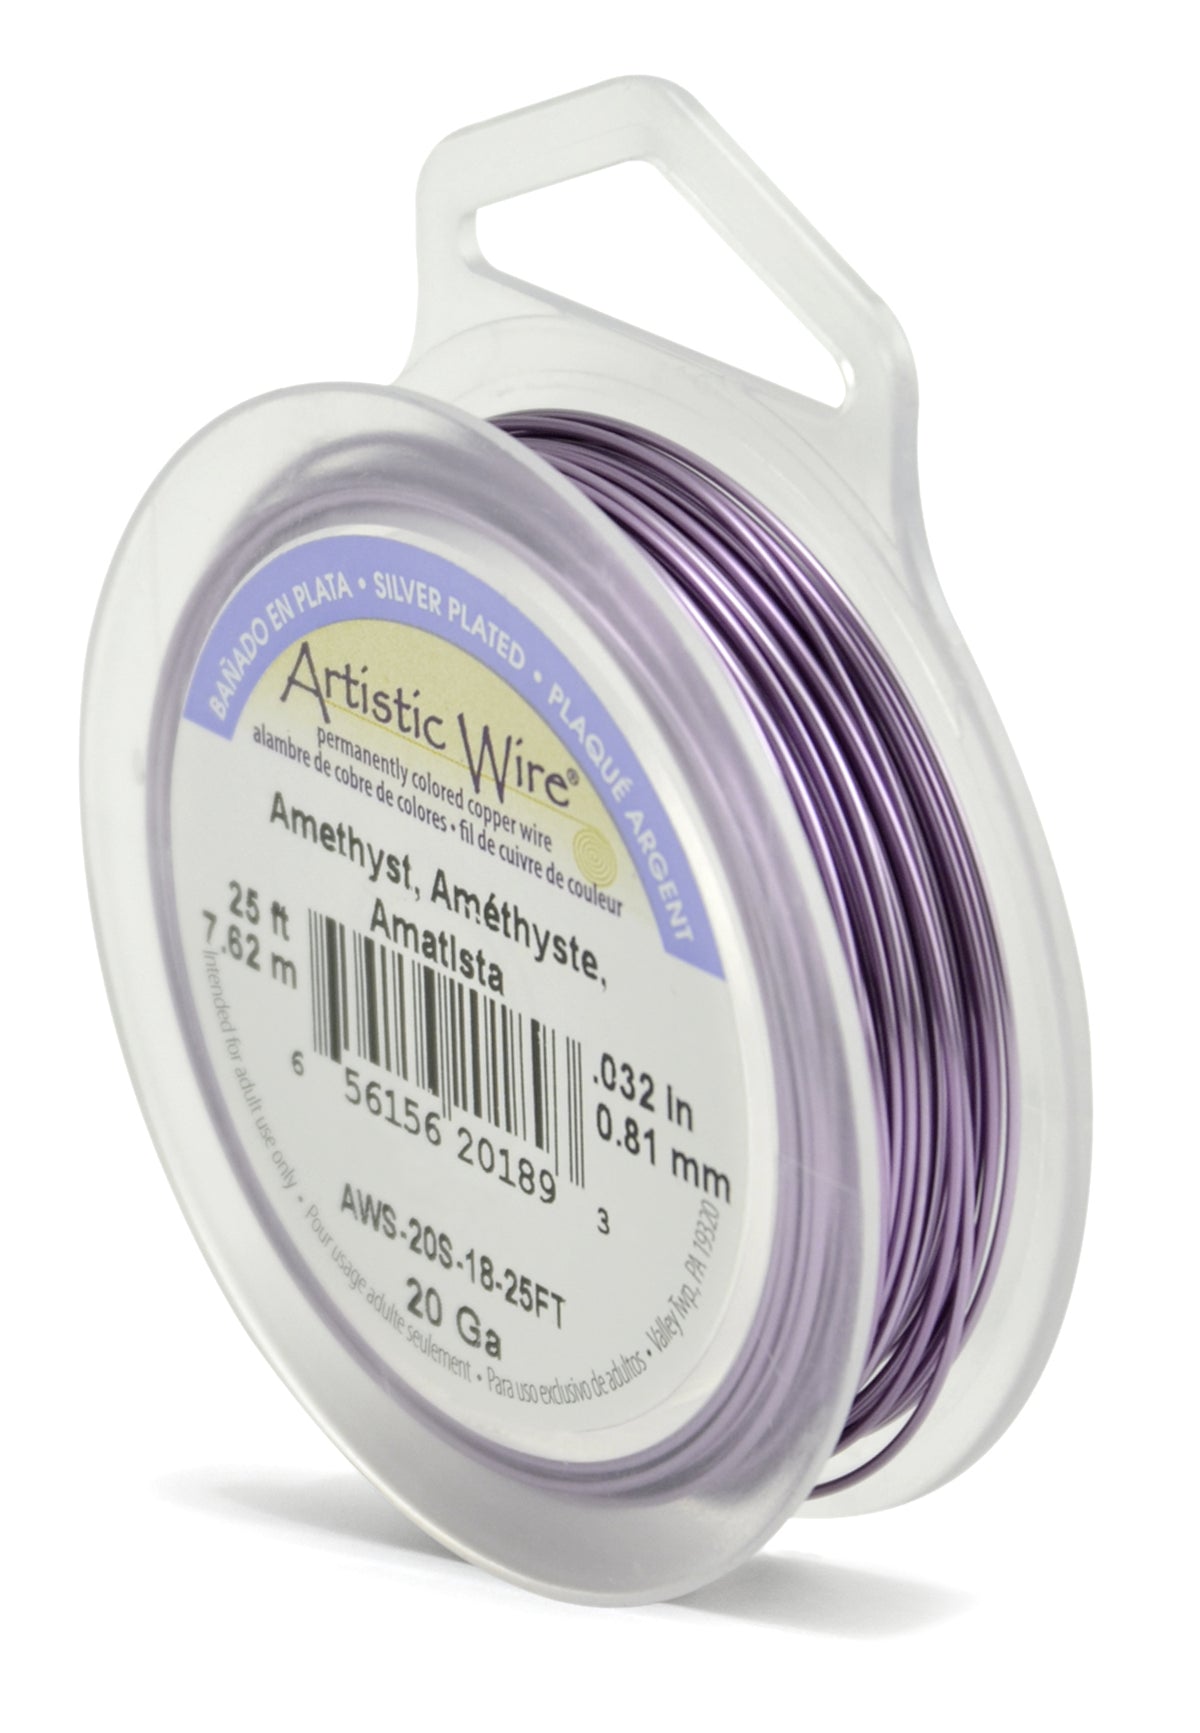 Artistic Wire, 20 Gauge (.81 mm), Silver Plated, Amethyst, 25 ft (7.6 m)